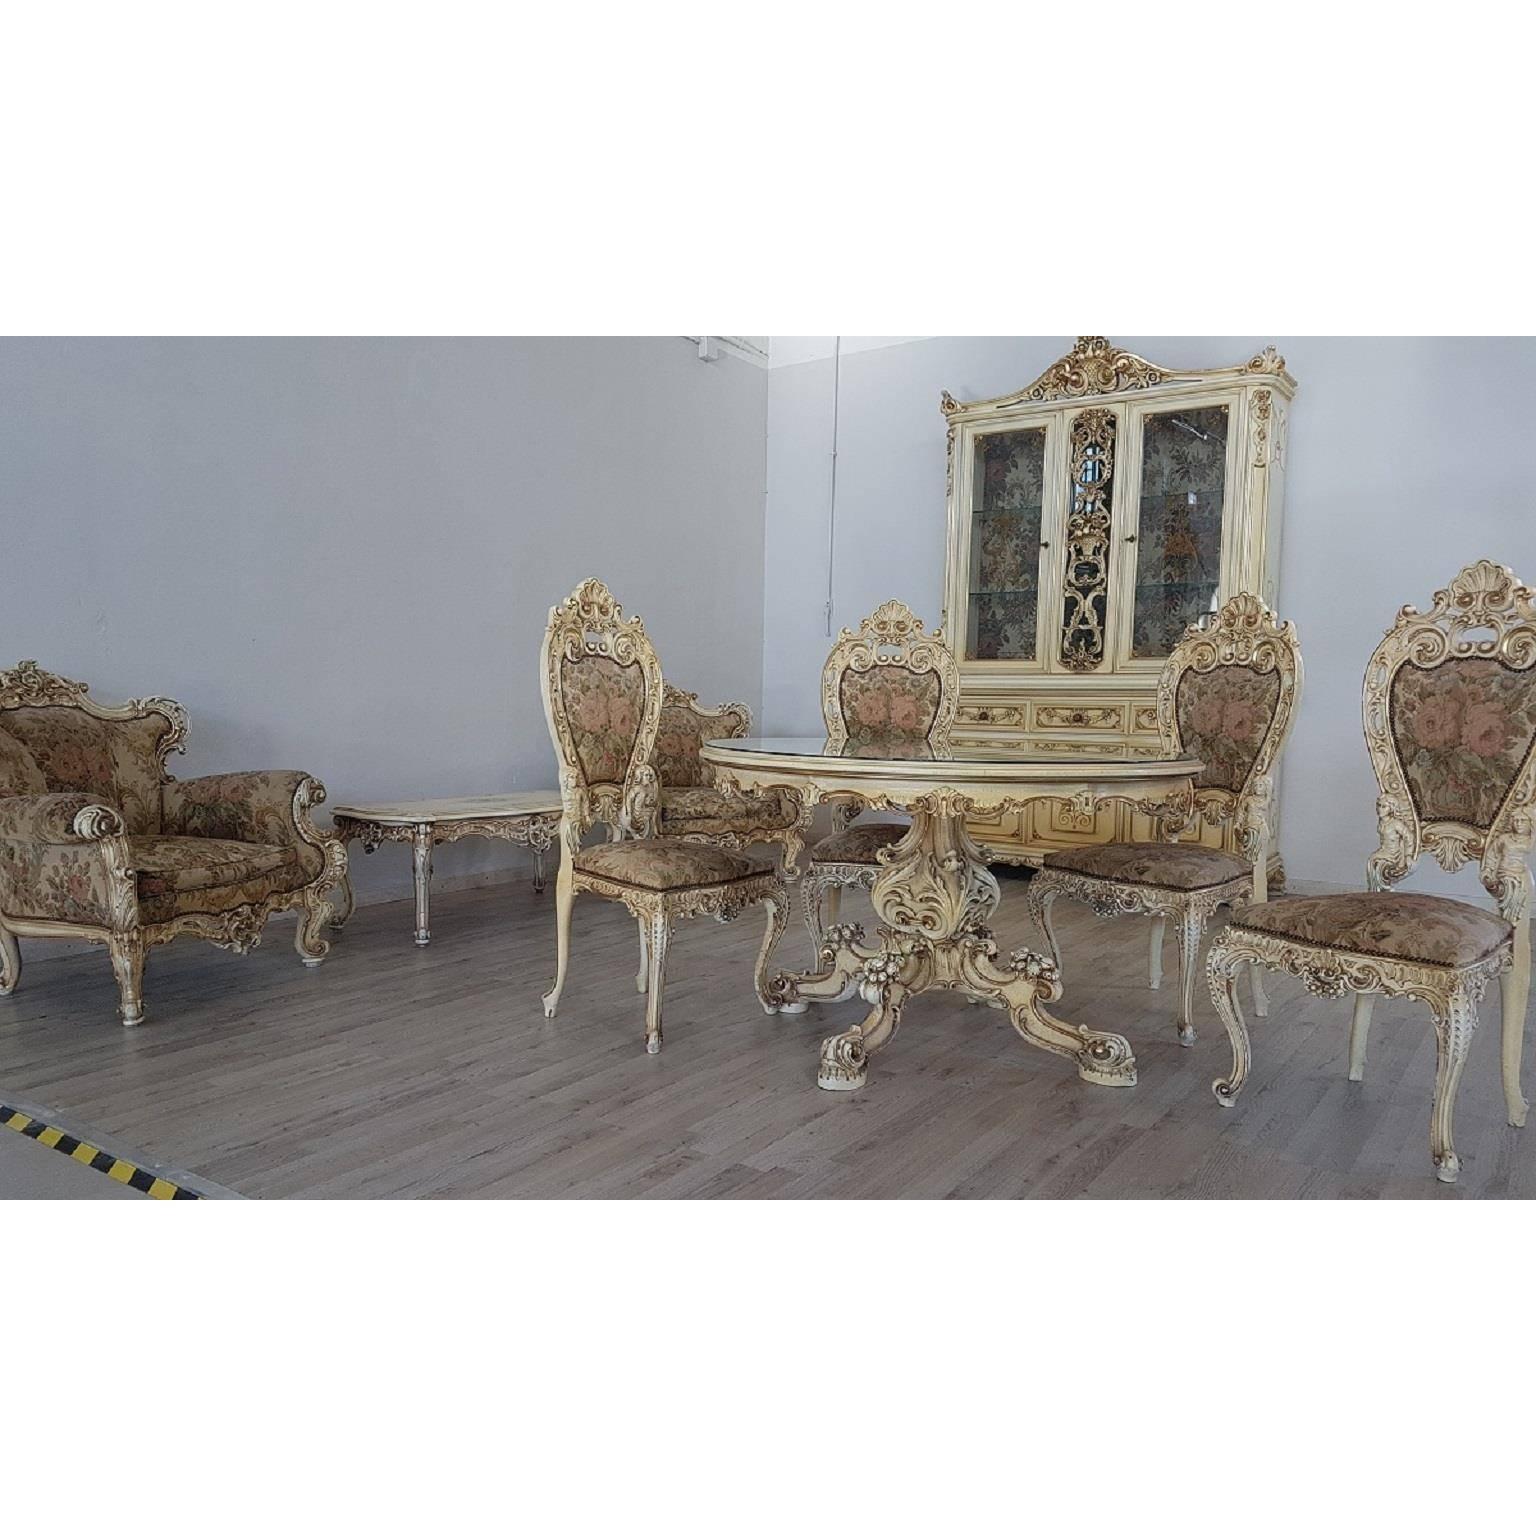 Refined and elegant complete dining room set created 20th century in perfect Venetian Baroque style. The room faithfully reproduces the splendor and refinement of the Baroque period. Completely lacquered and painted, they love with care even in the